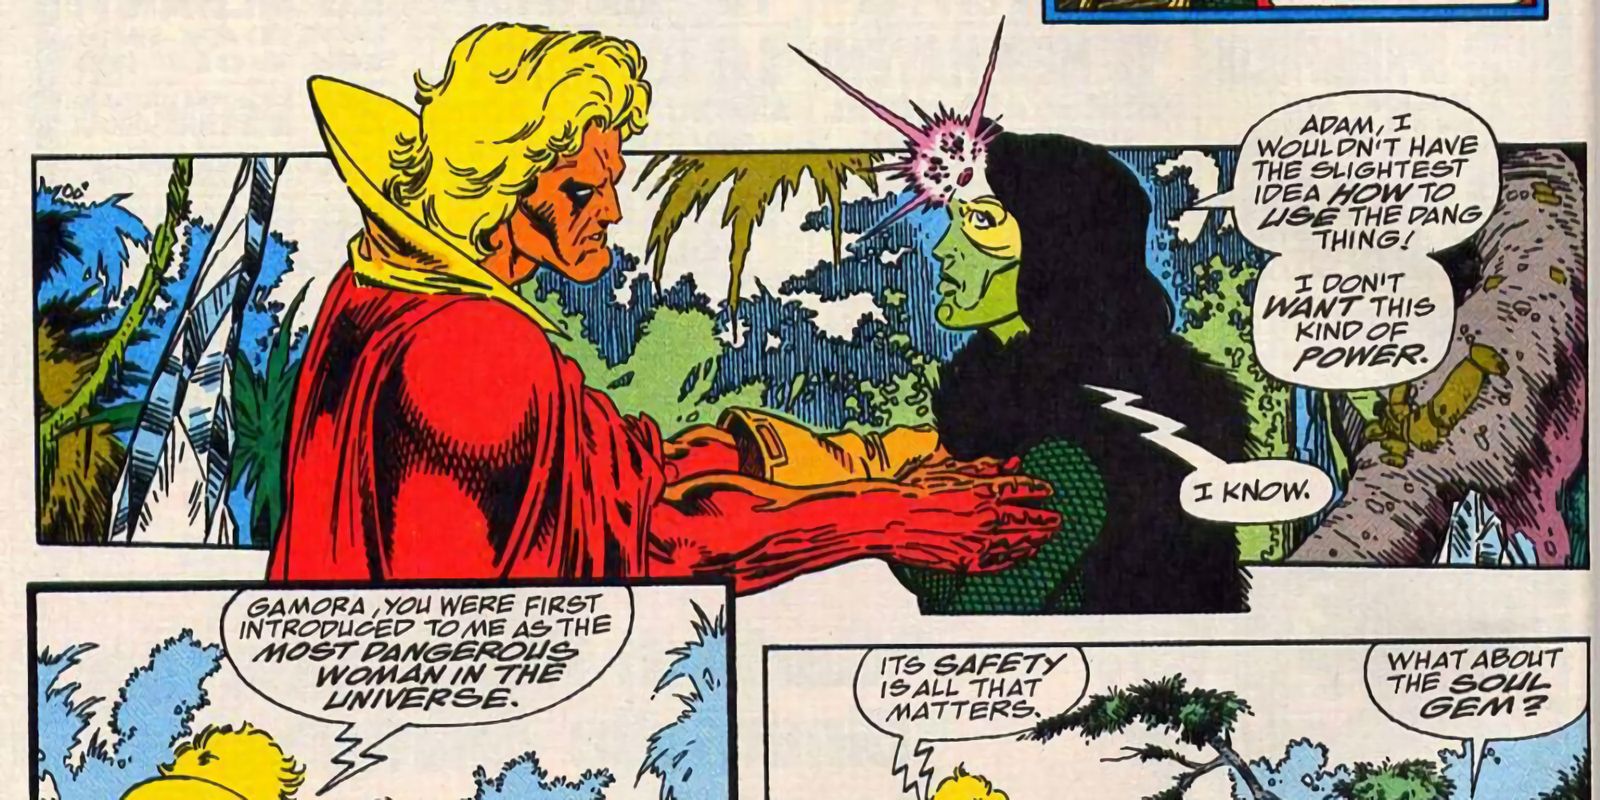 Adam Warlock talks to Gamora while she is in possession of the Time Gem